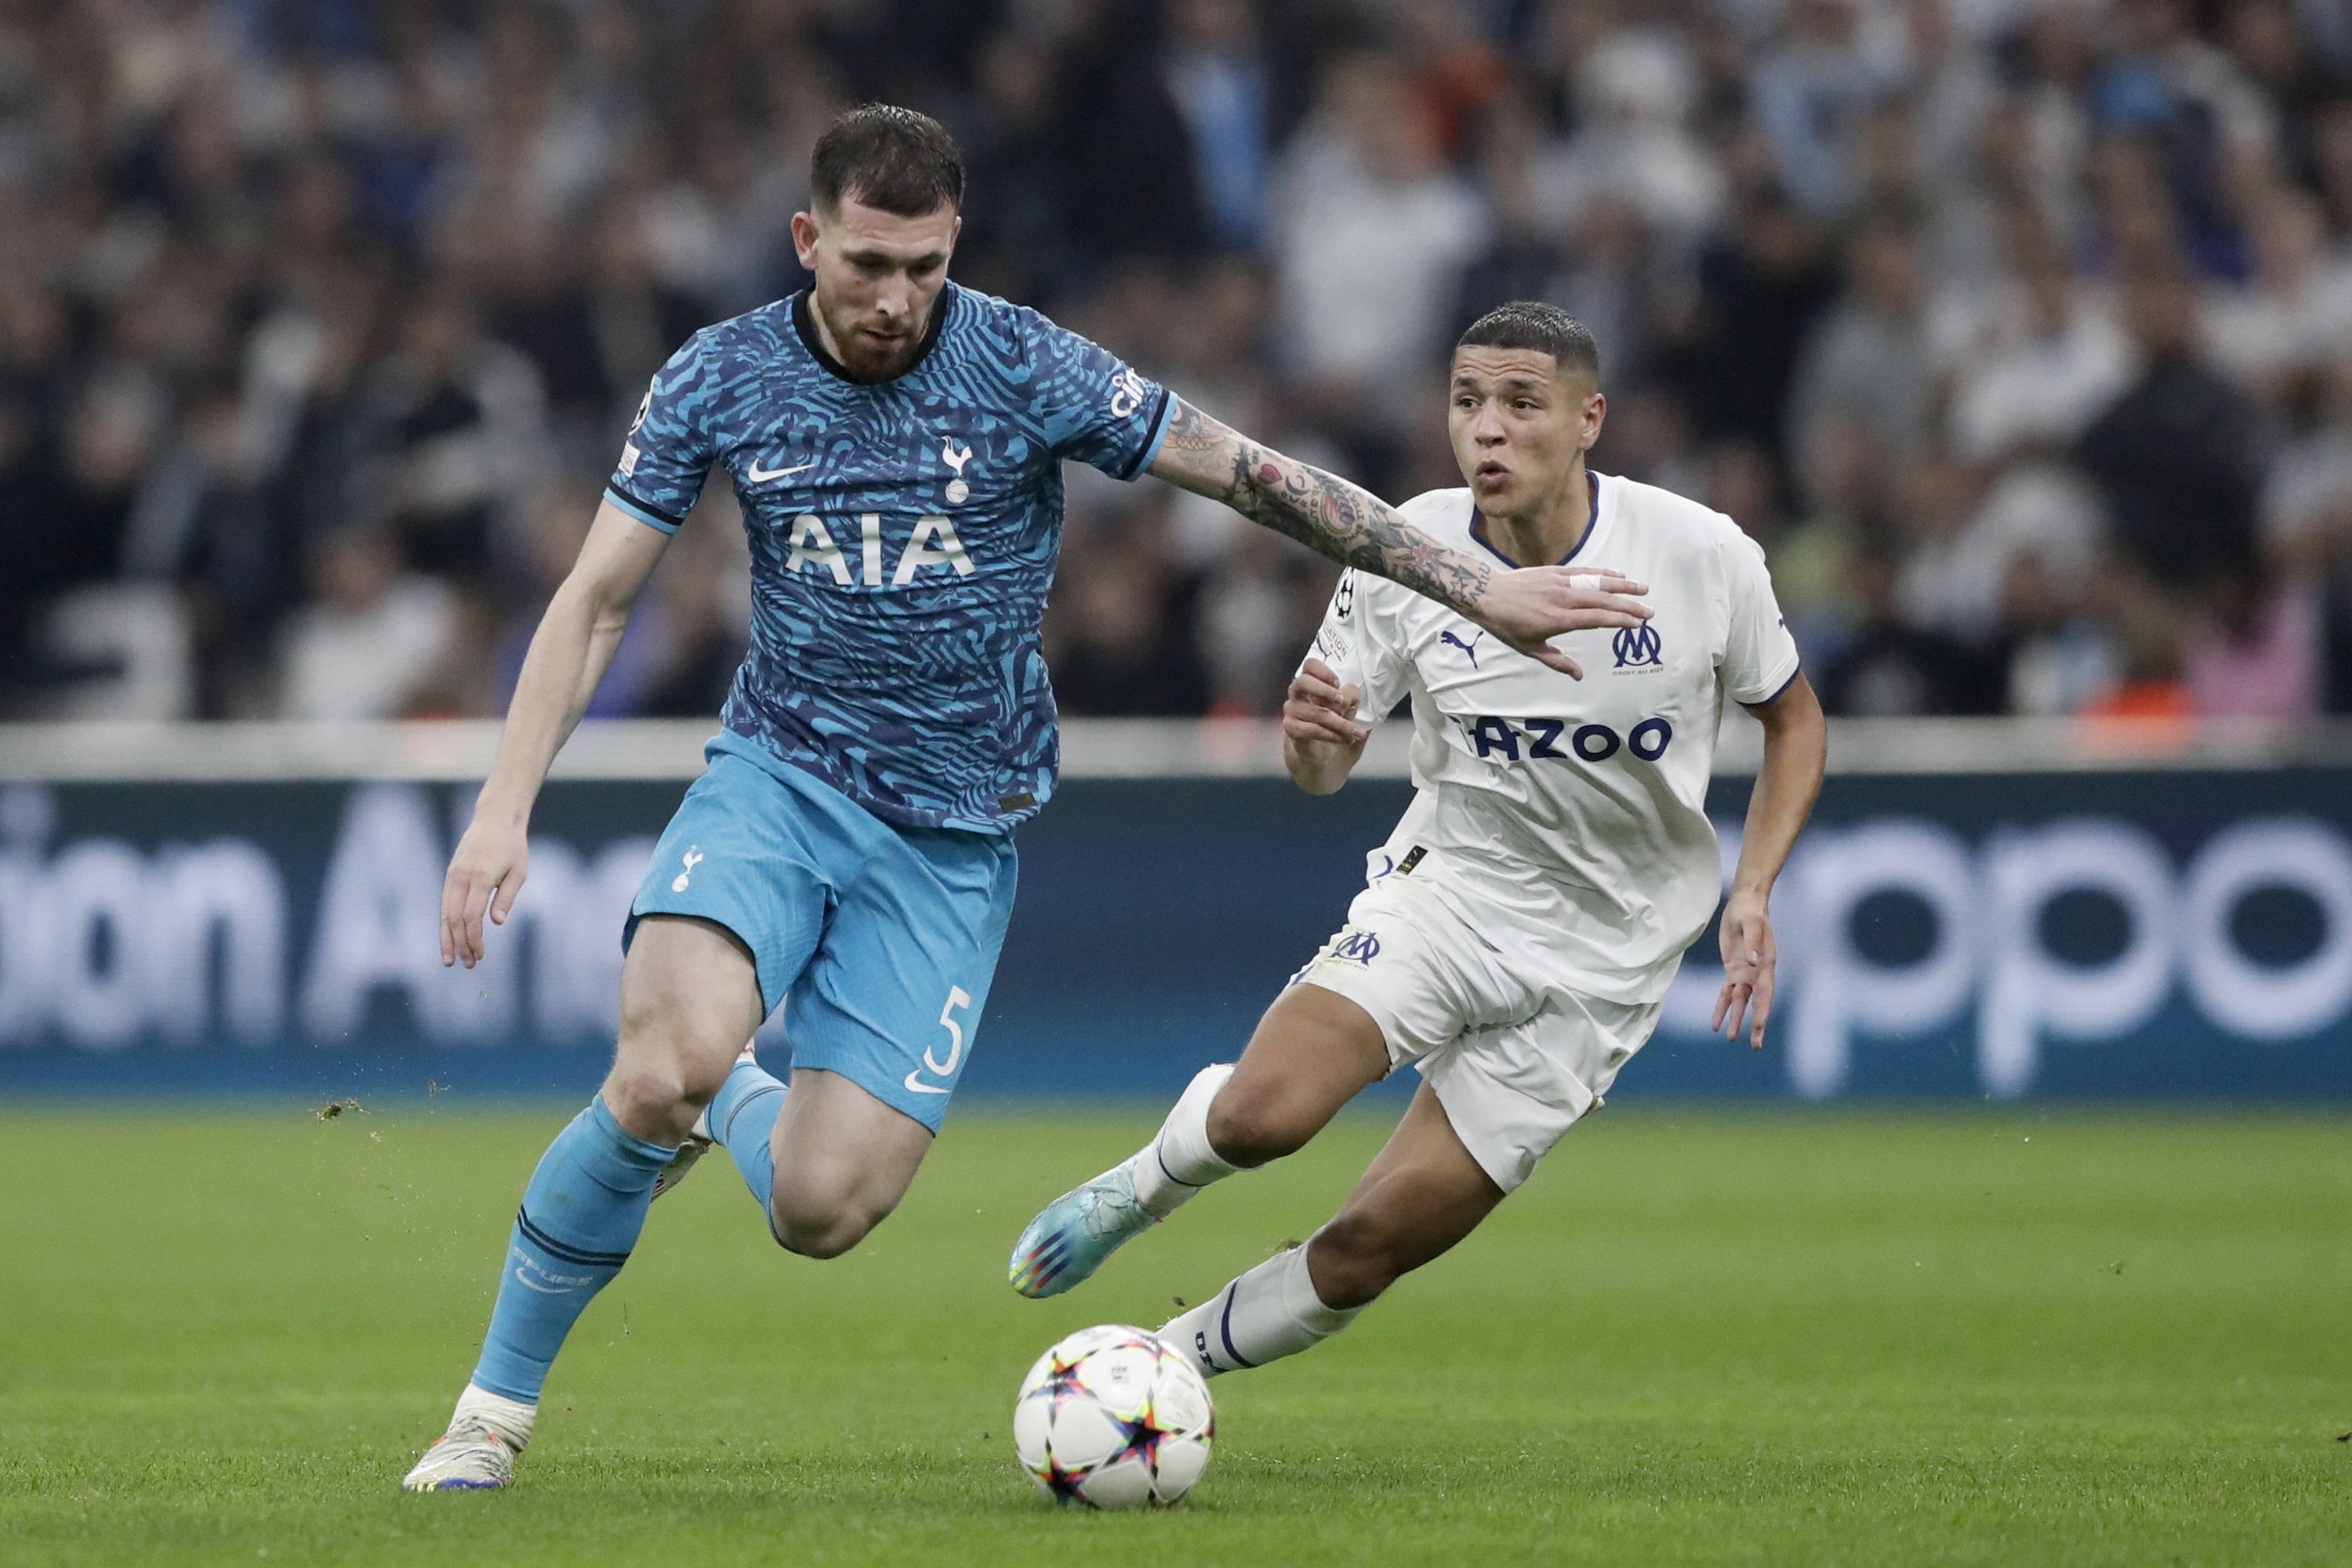 Spurs, Eintracht into UCL round of 16 as Liverpool edges Napoli Daily Sabah